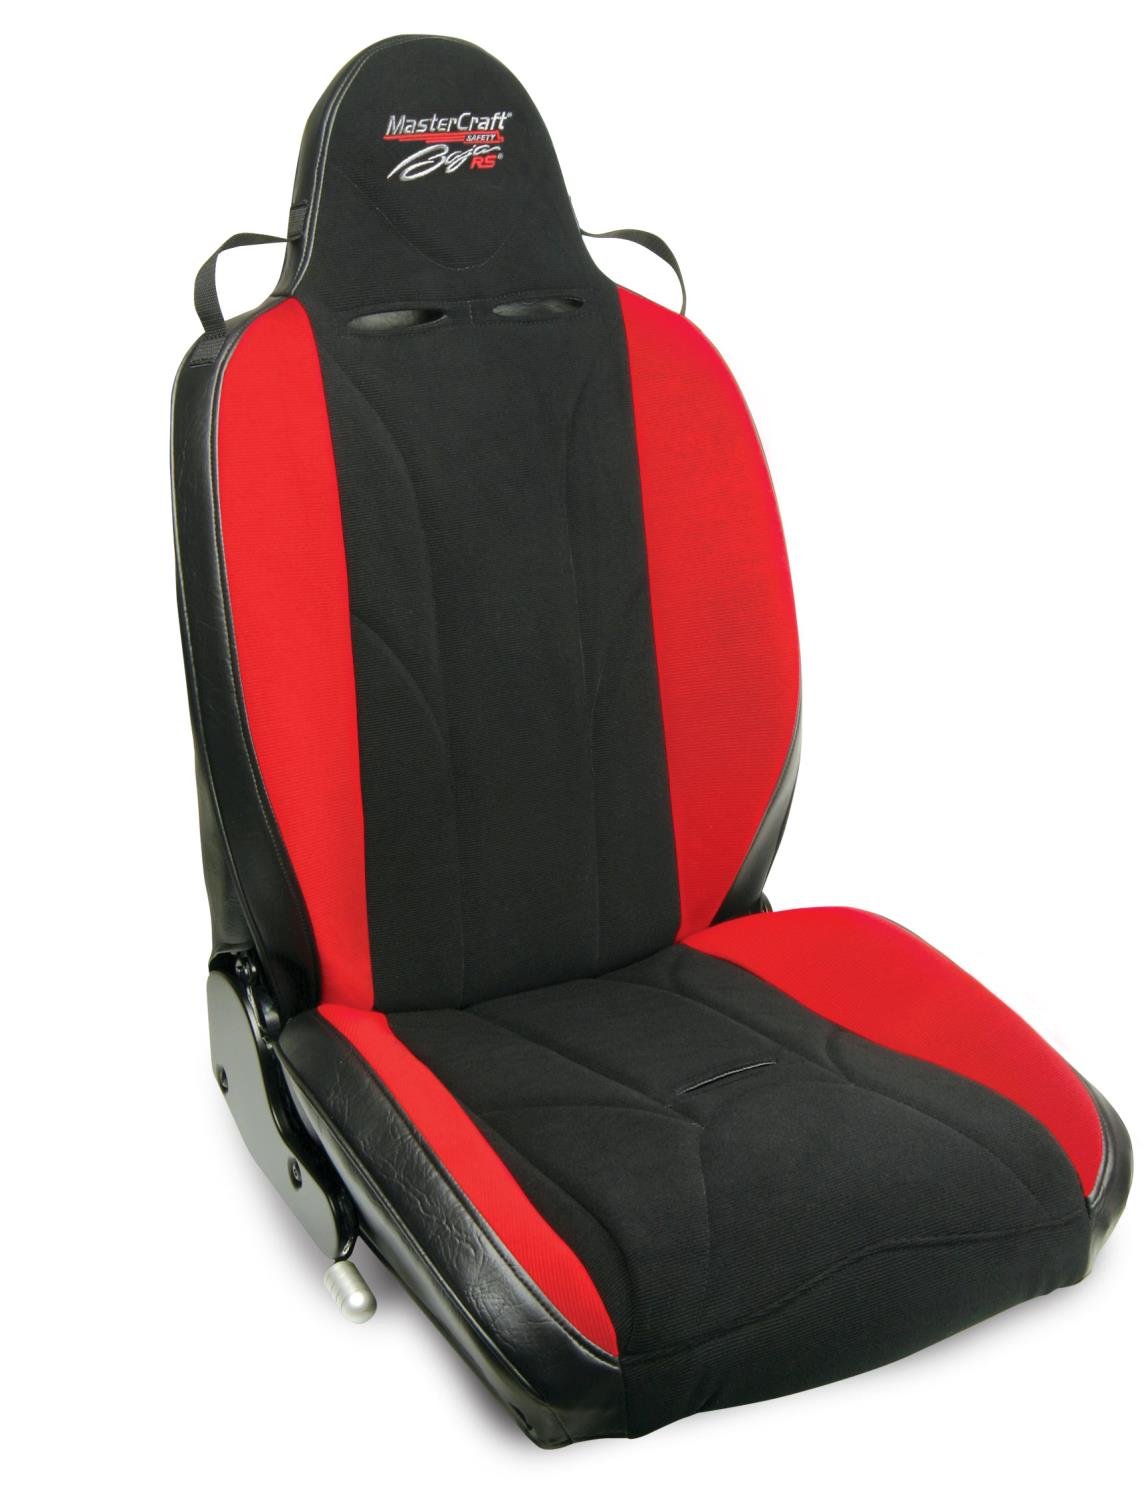 506022 MasterCraft Baja RS w/Fixed Headrest, Black w/Black Center & Red Side Panels, Recliner Lever Right, w/BRS Stitch Pattern